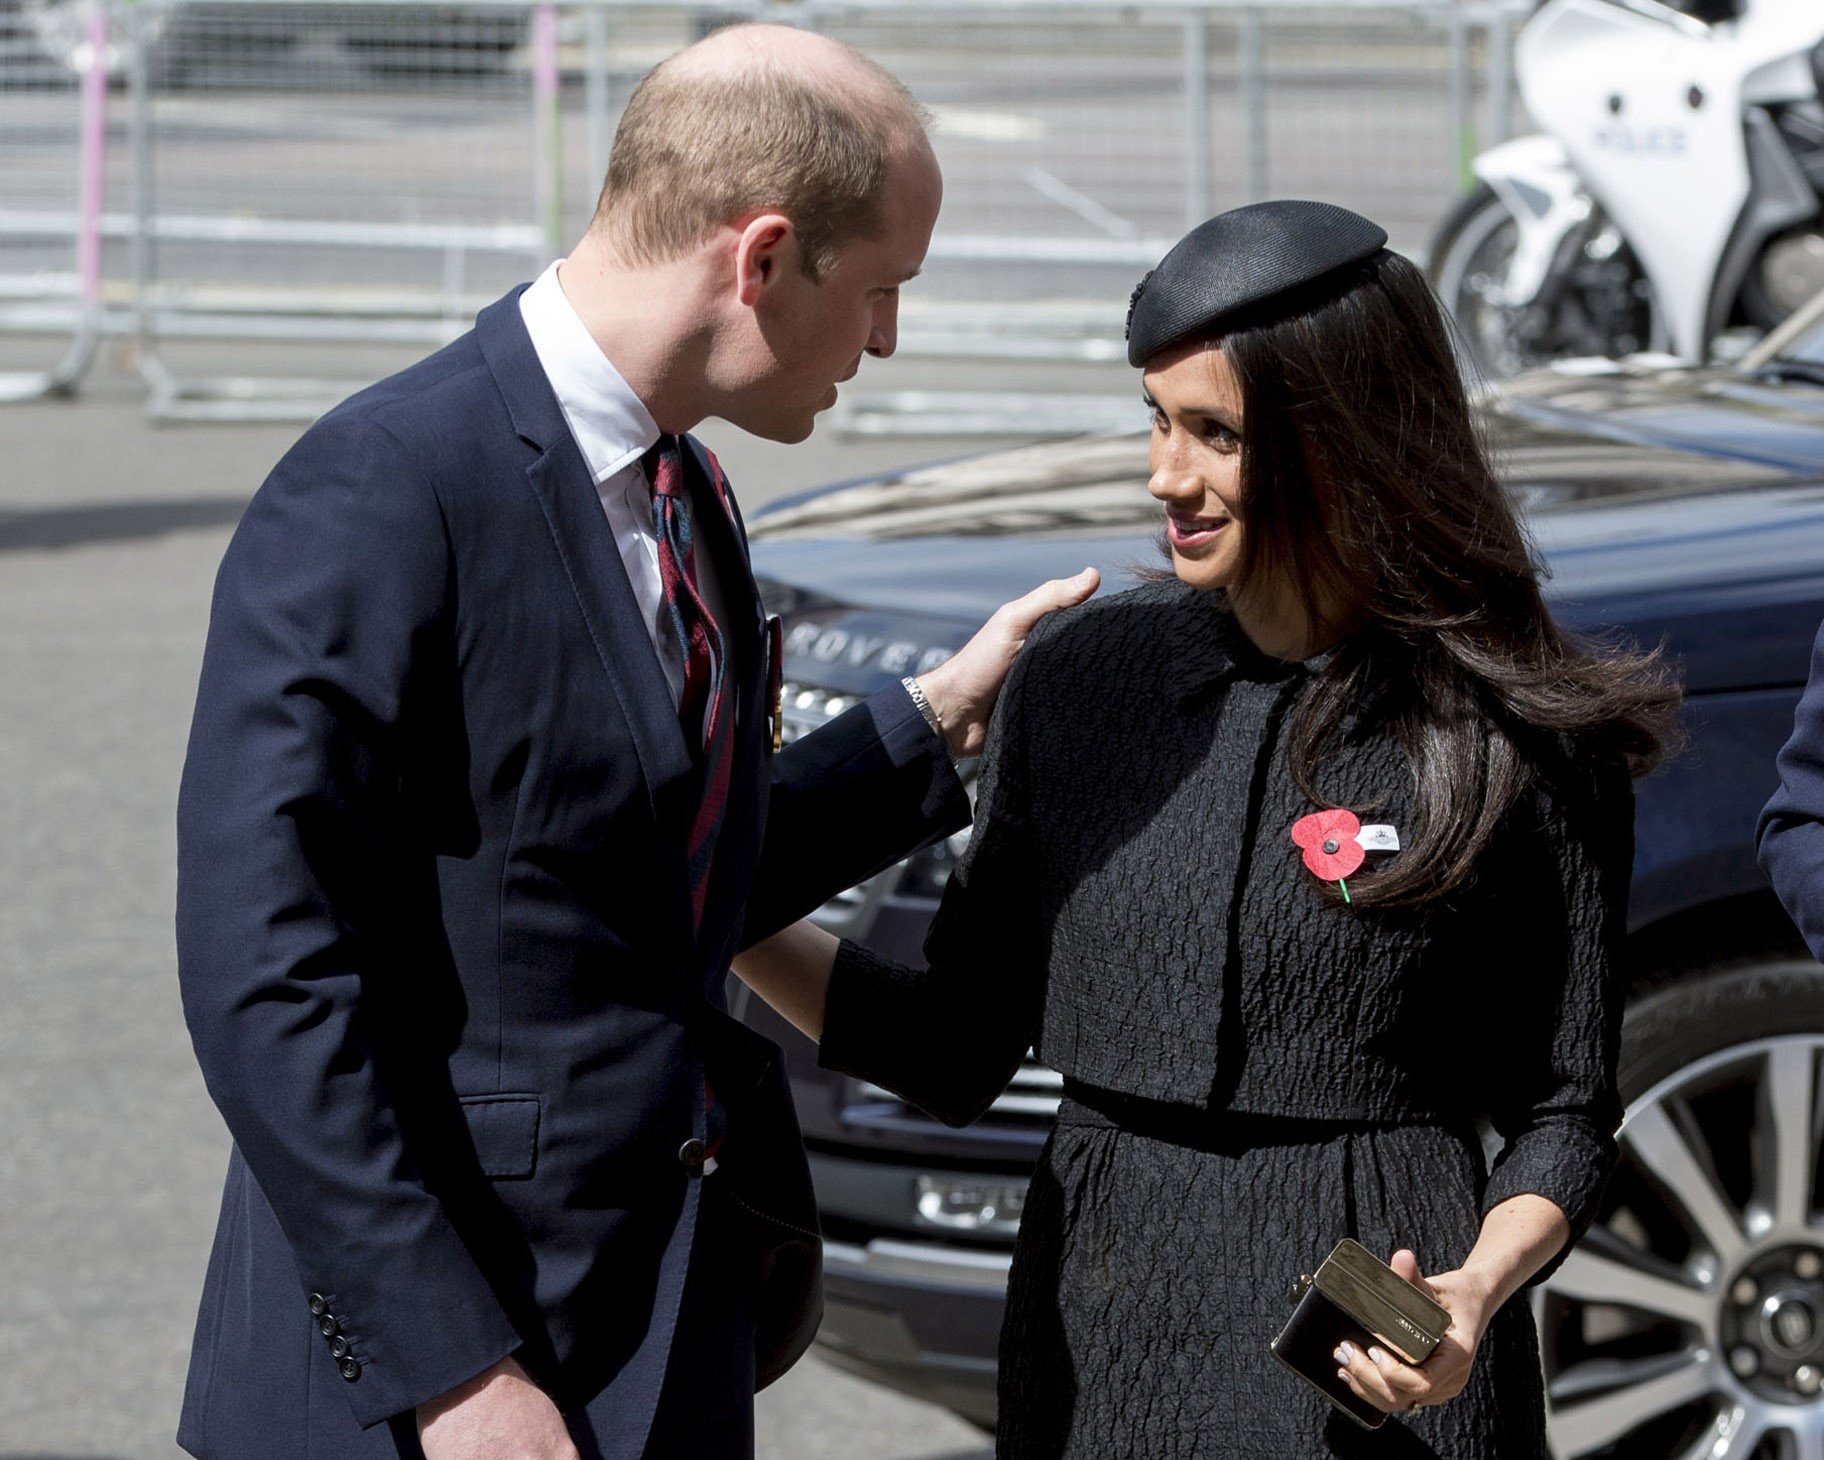 Prince William, who is changing things up now after Meghan Markle's plea, greets the duchess as they attend an Anzac Day service